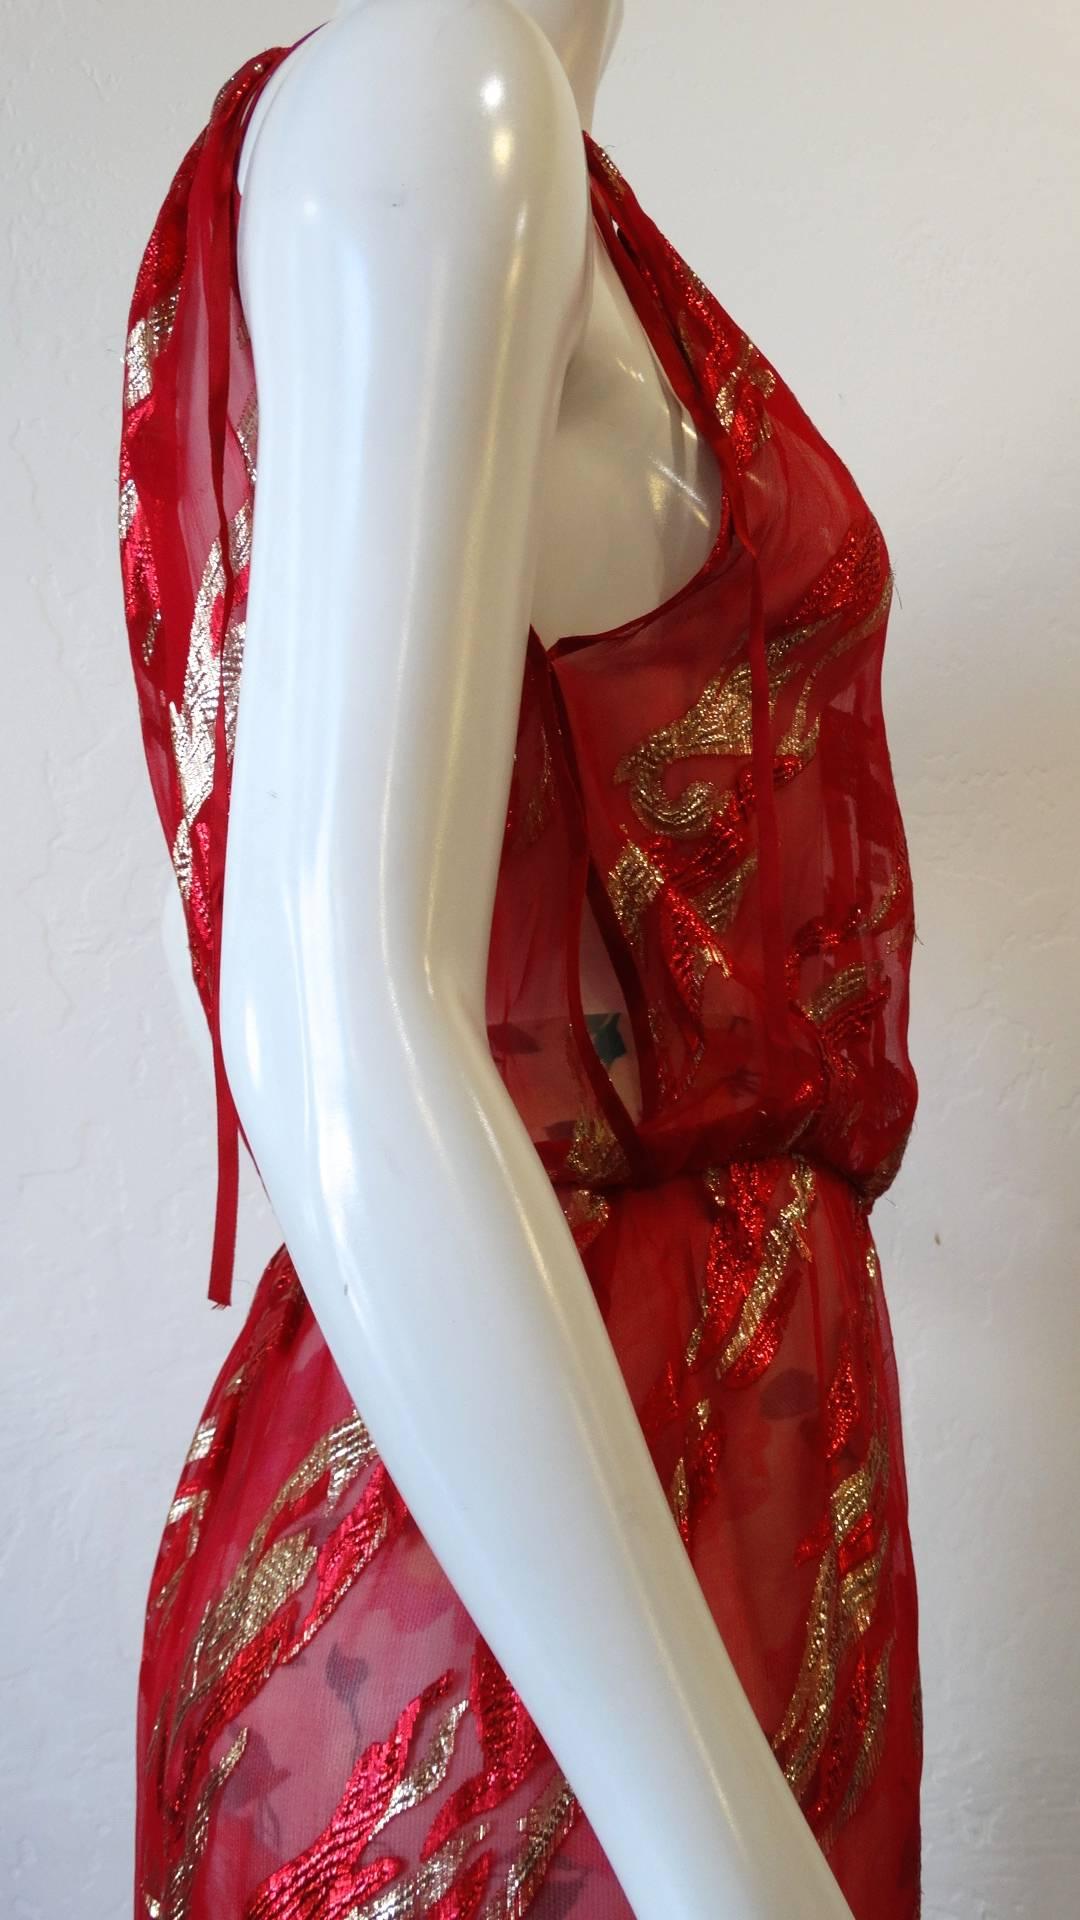 Gorgeous 1980s Saint Laurent Rive Gauche red sheer halter dress! Made of a red sheer chiffon fabric with woven metallic flame-like pattern throughout. Ultra-sexy silhouette with long slit up the left leg, perfect for showing off a thigh high boot.